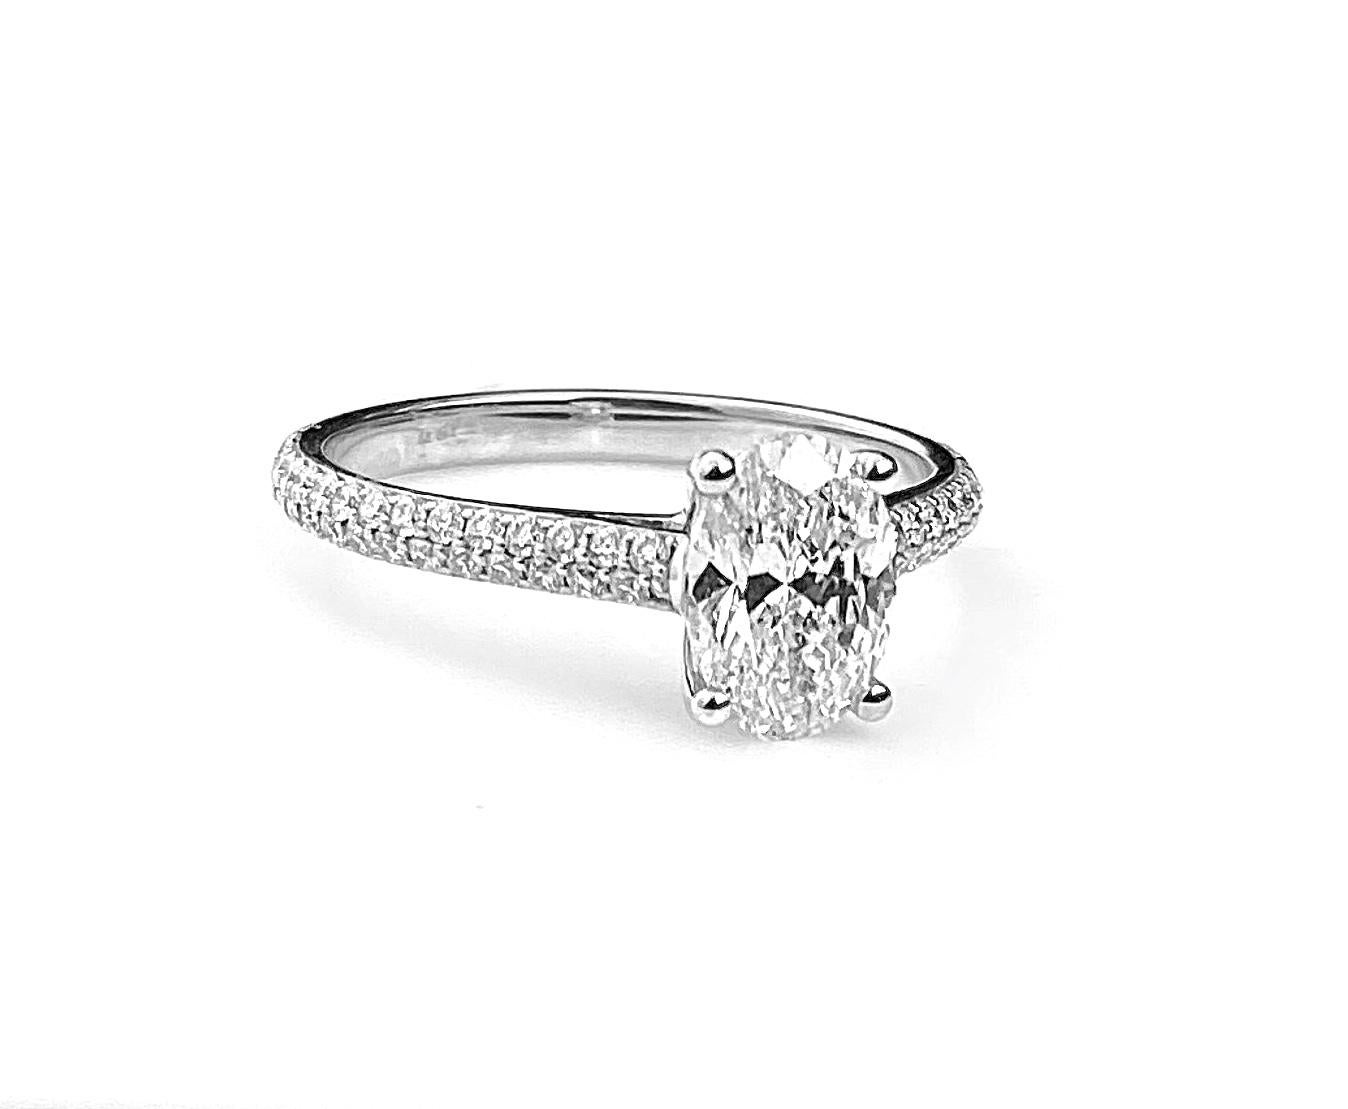 Oval Cut Diamond Solitaire Engagement Ring with Pavé Set Diamond Band For Sale 1